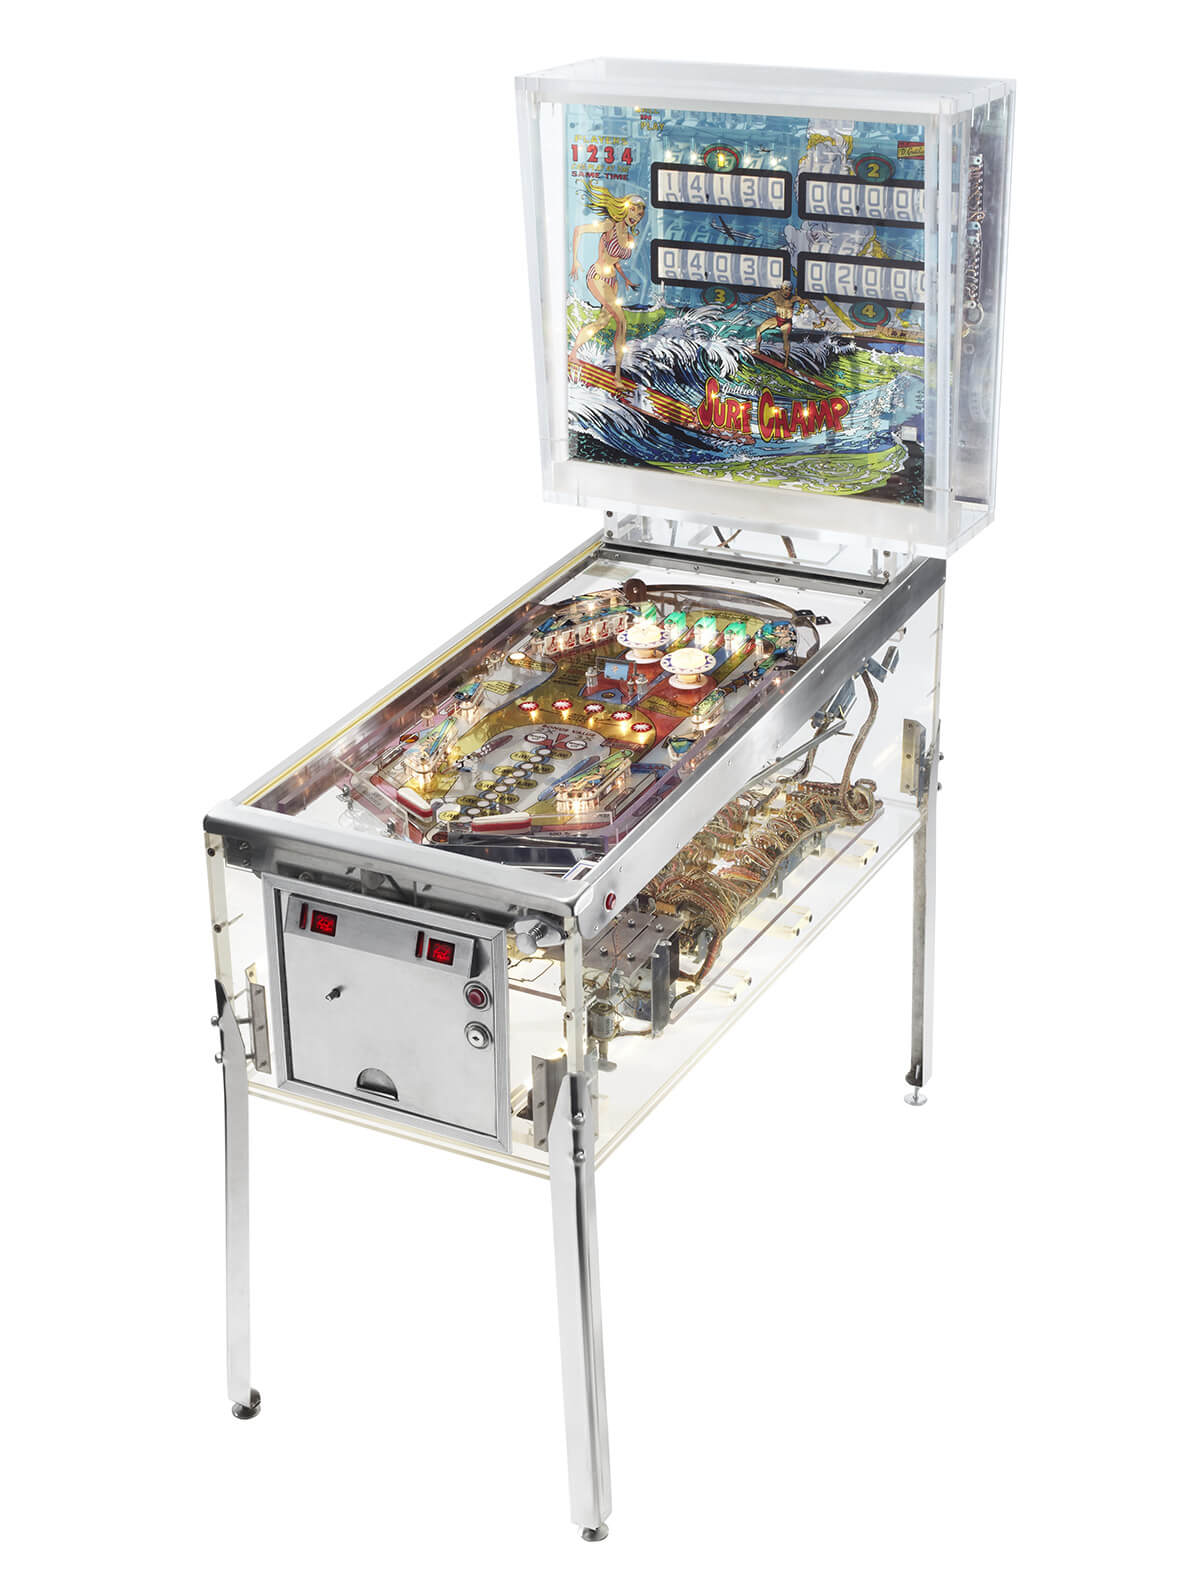 A clear walled electromechanical pinball machine created by the Pacific Pinball Museum to show what the insides of pinball machines look like